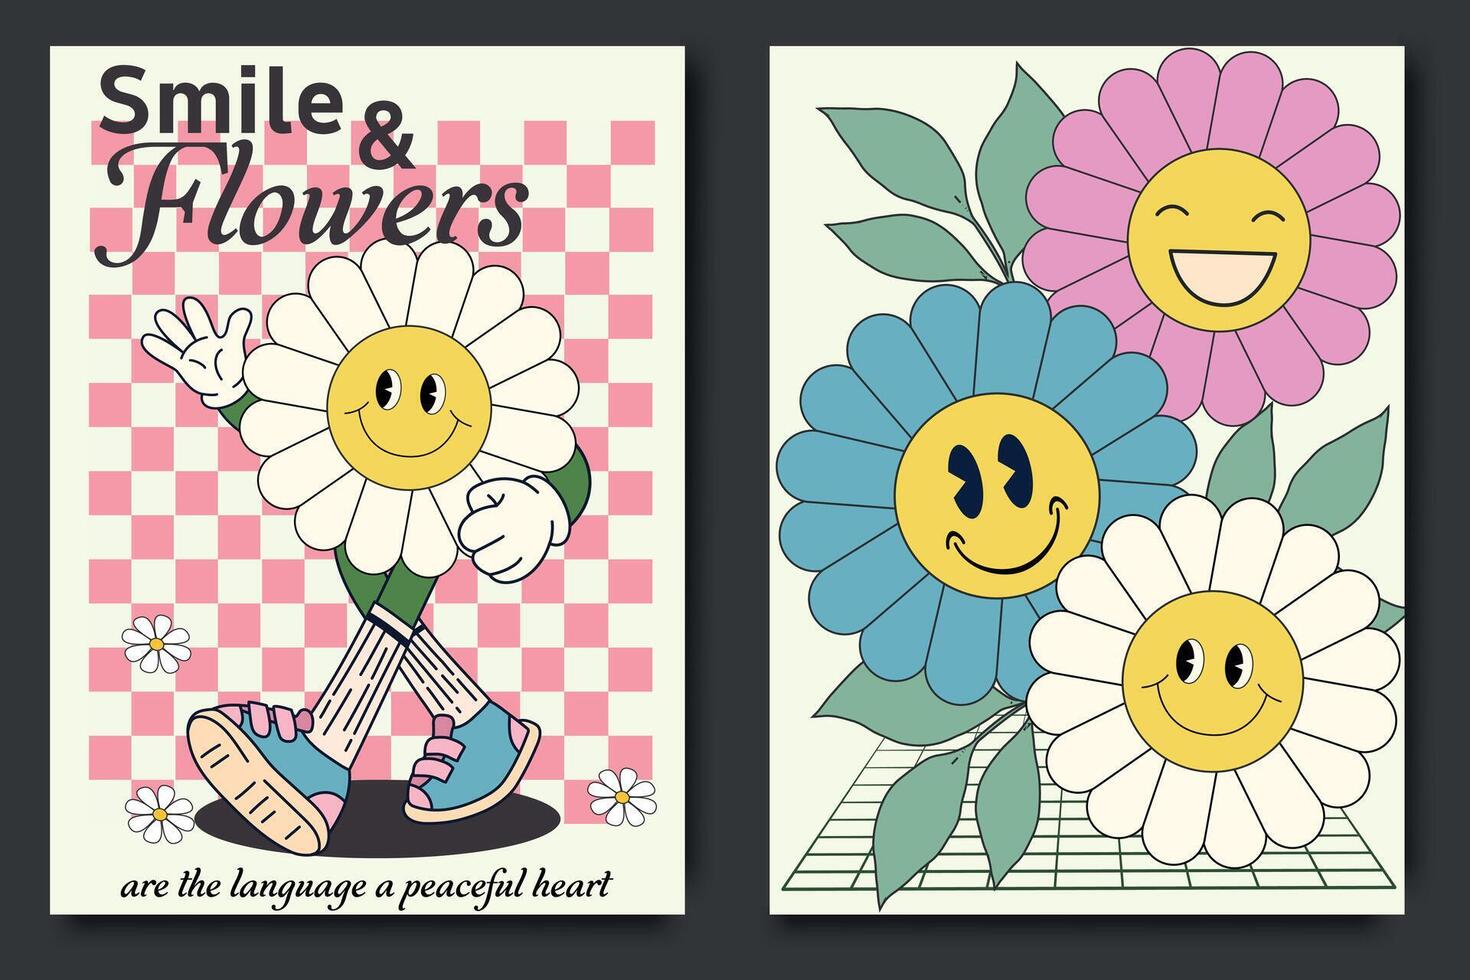 Groovy 70s posters with a cute flower cartoon character. Comic characters in trendy retro 60s 70s style. 70s retro inspirational poster with vintage groovy typography with daisy flowers, smiley face vector